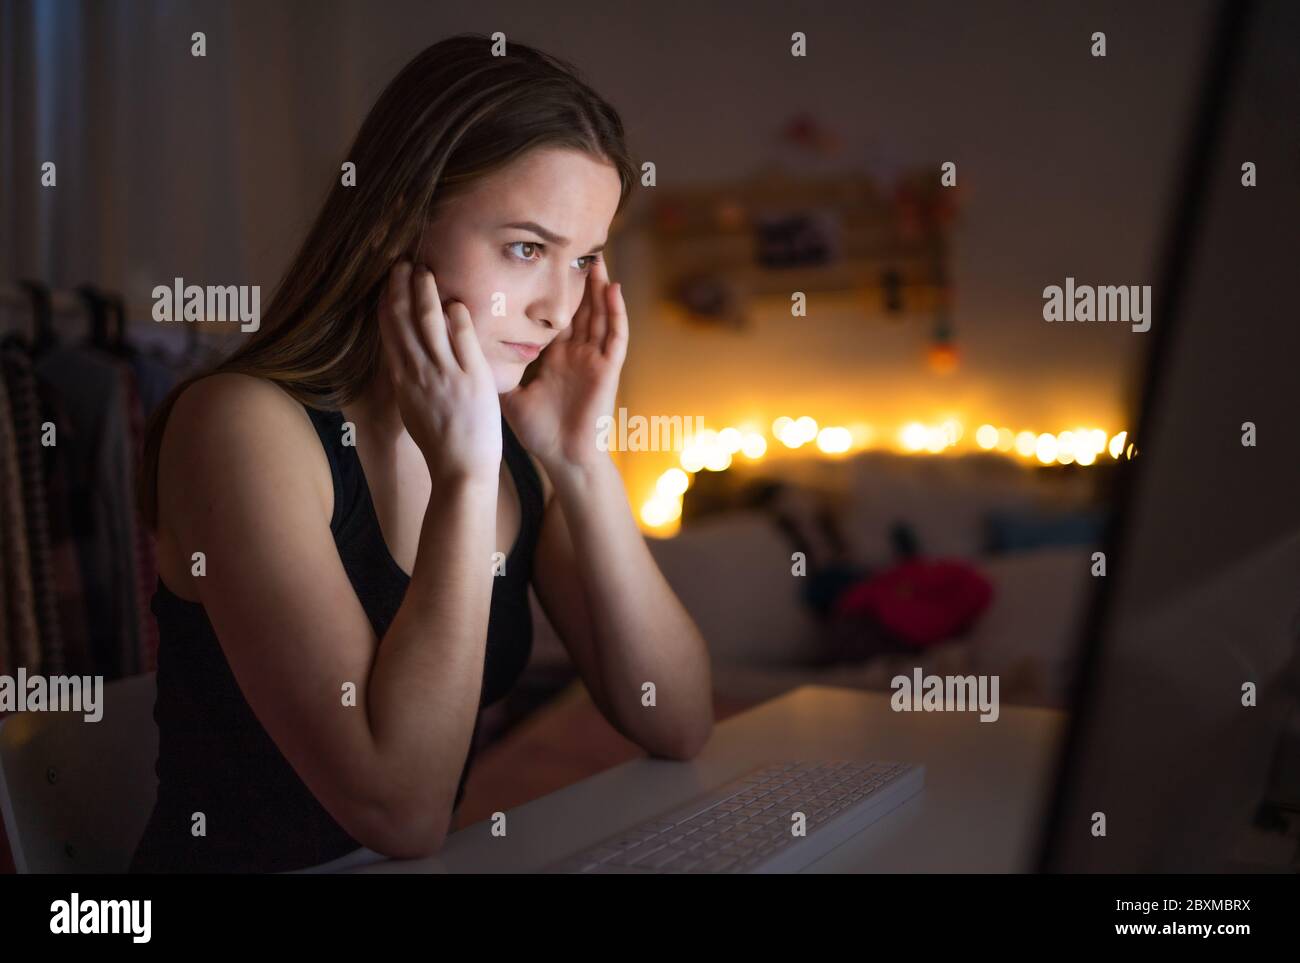 Worried young girl with computer sitting indoors, internet abuse concept. Stock Photo